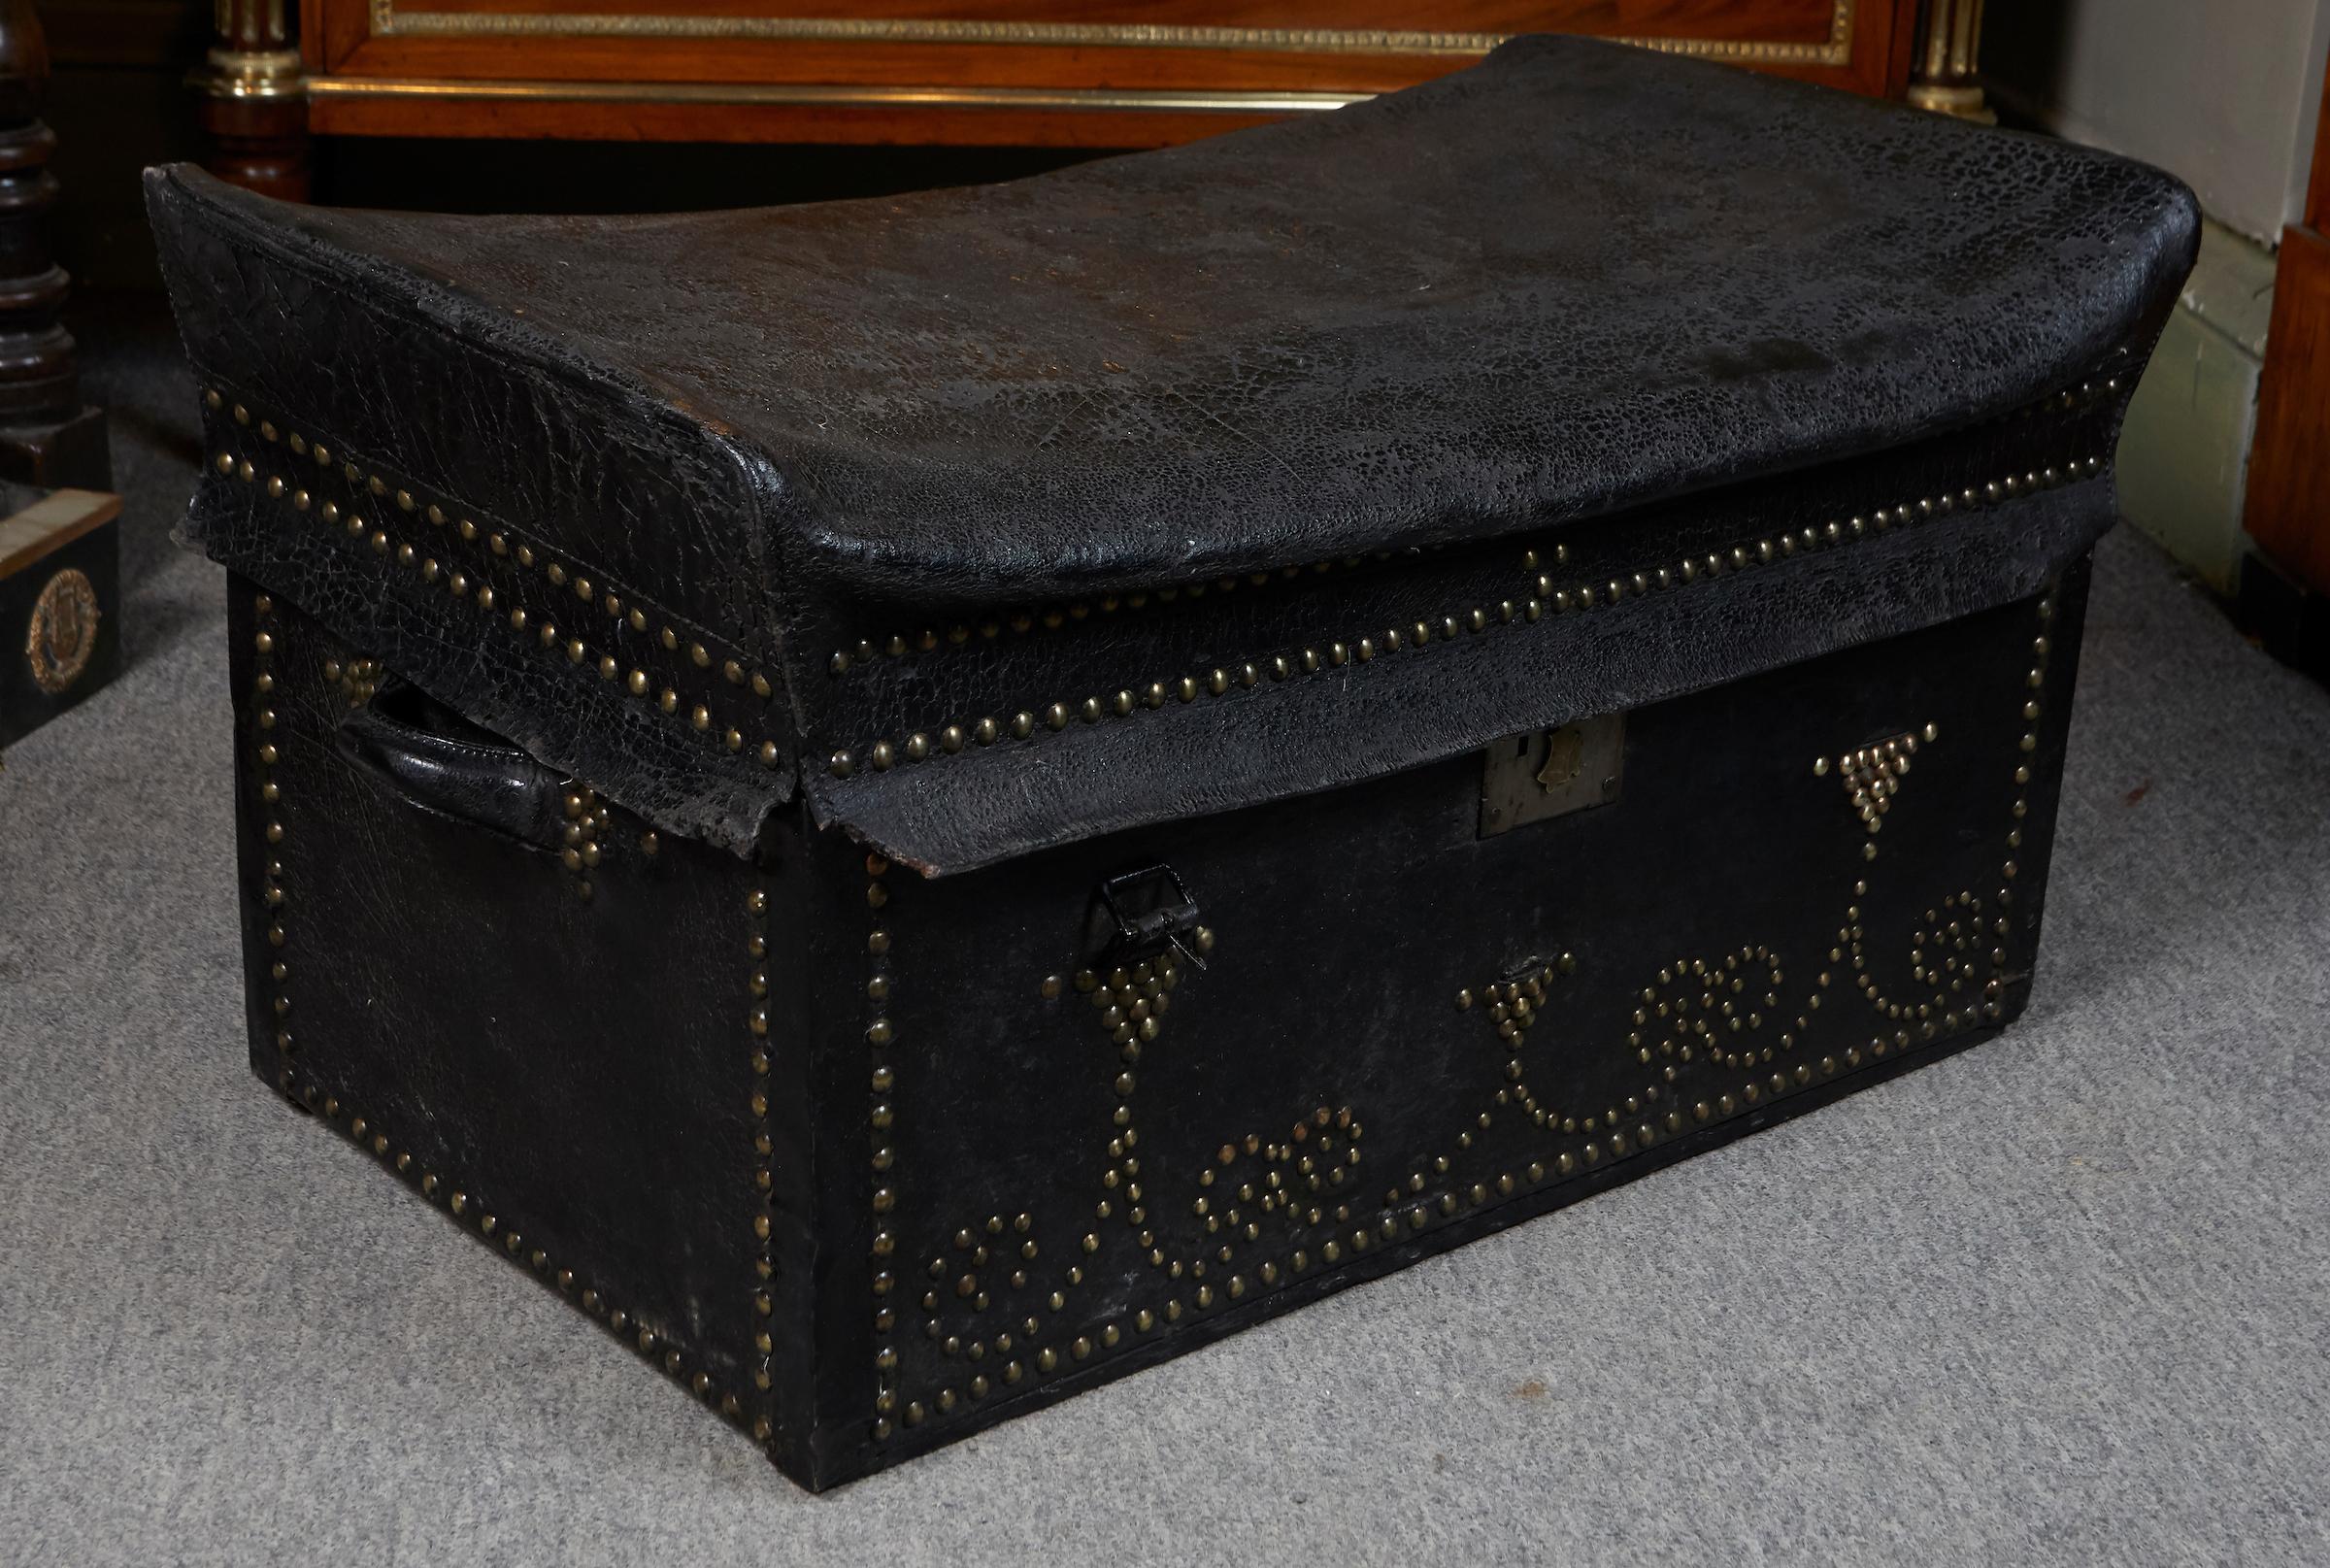 English studded black leather coach trunk, brass lock key hole stamped VR patent for Victoria Regina with a crown.